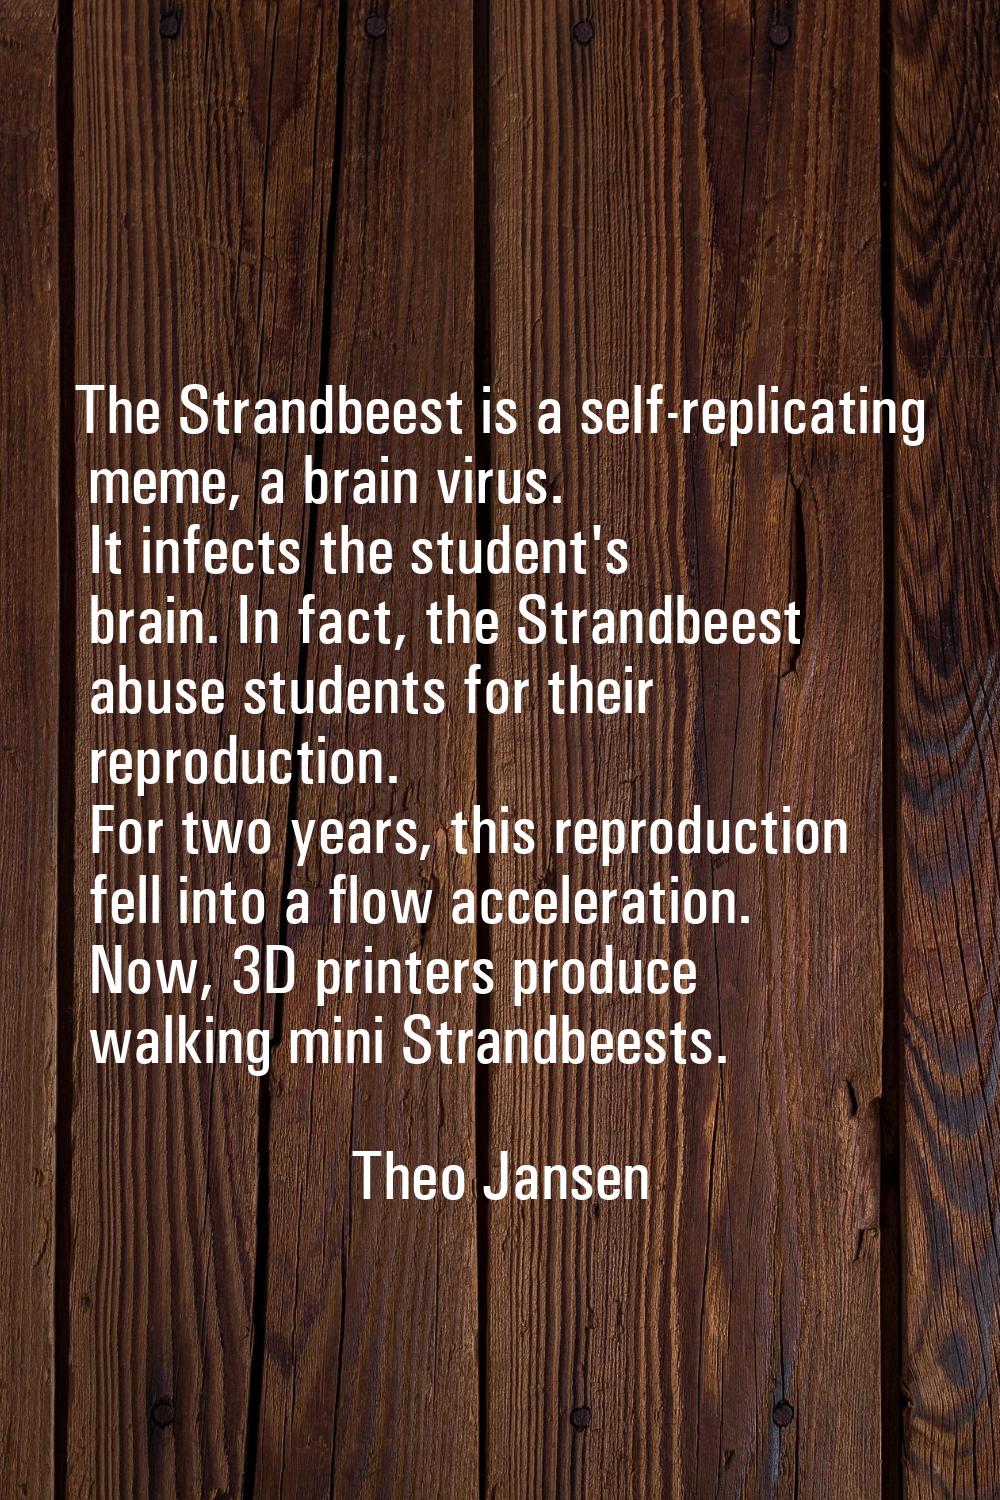 The Strandbeest is a self-replicating meme, a brain virus. It infects the student's brain. In fact,